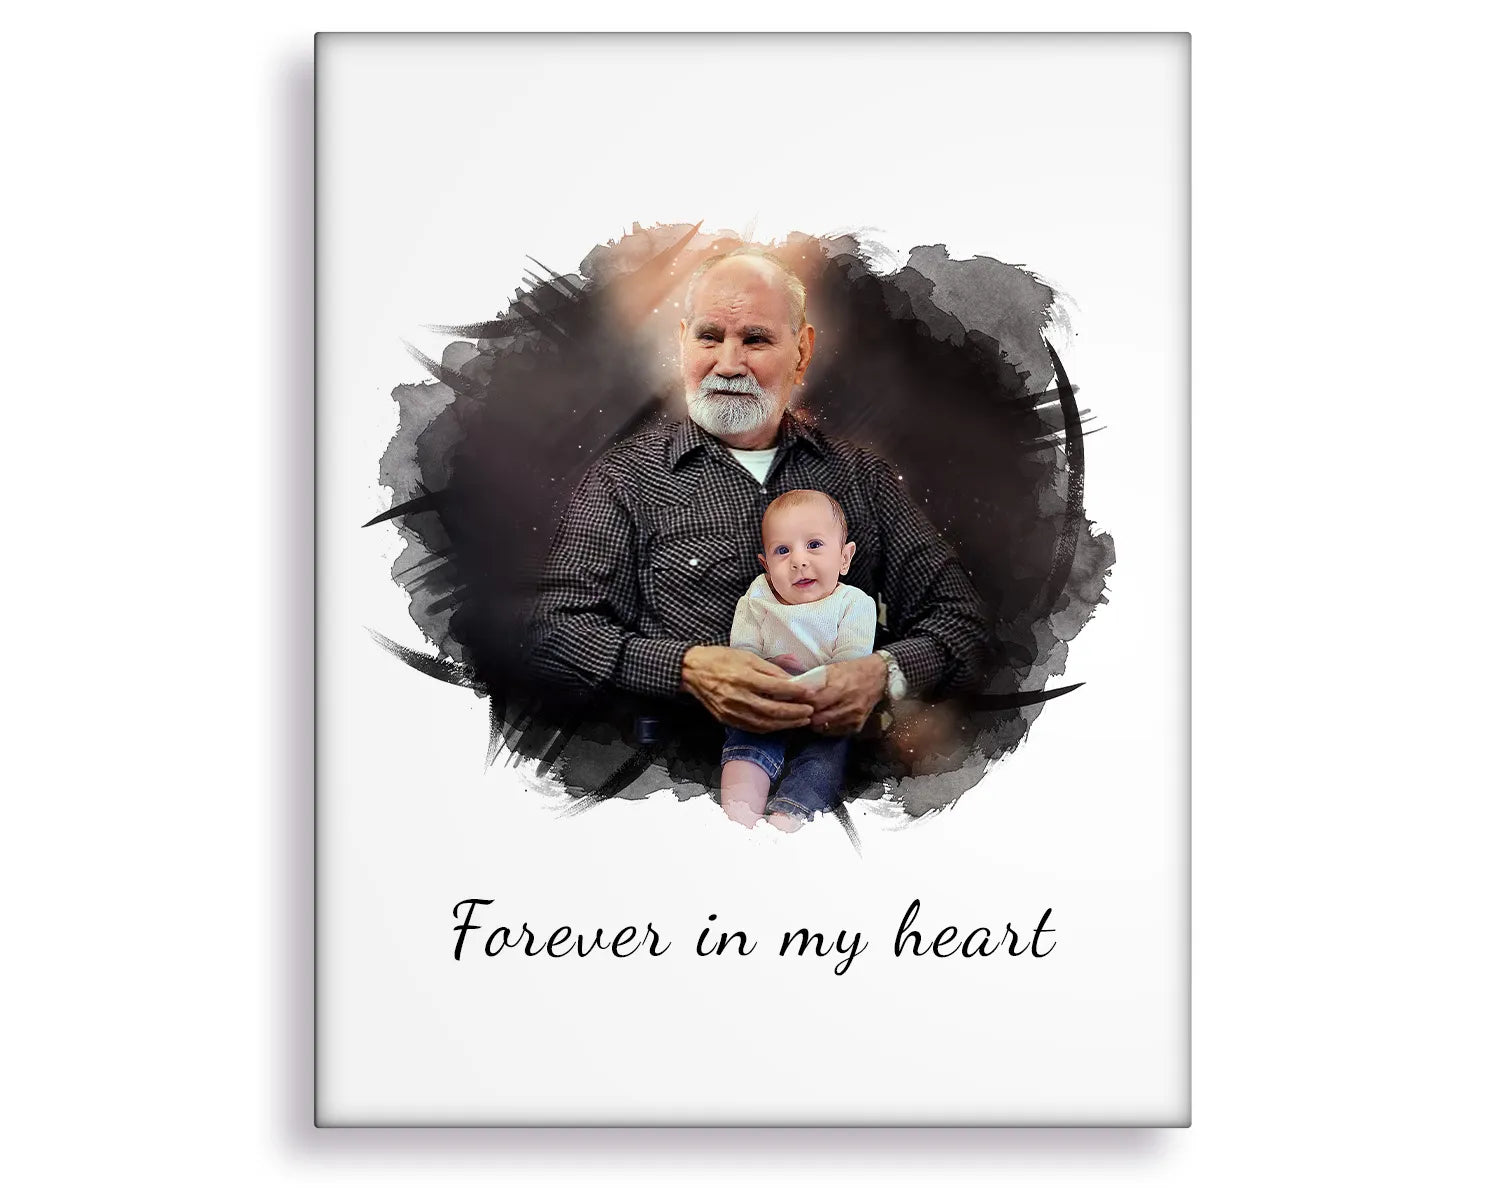 Child and departed loved one turned into a breathtaking custom memorial portrait